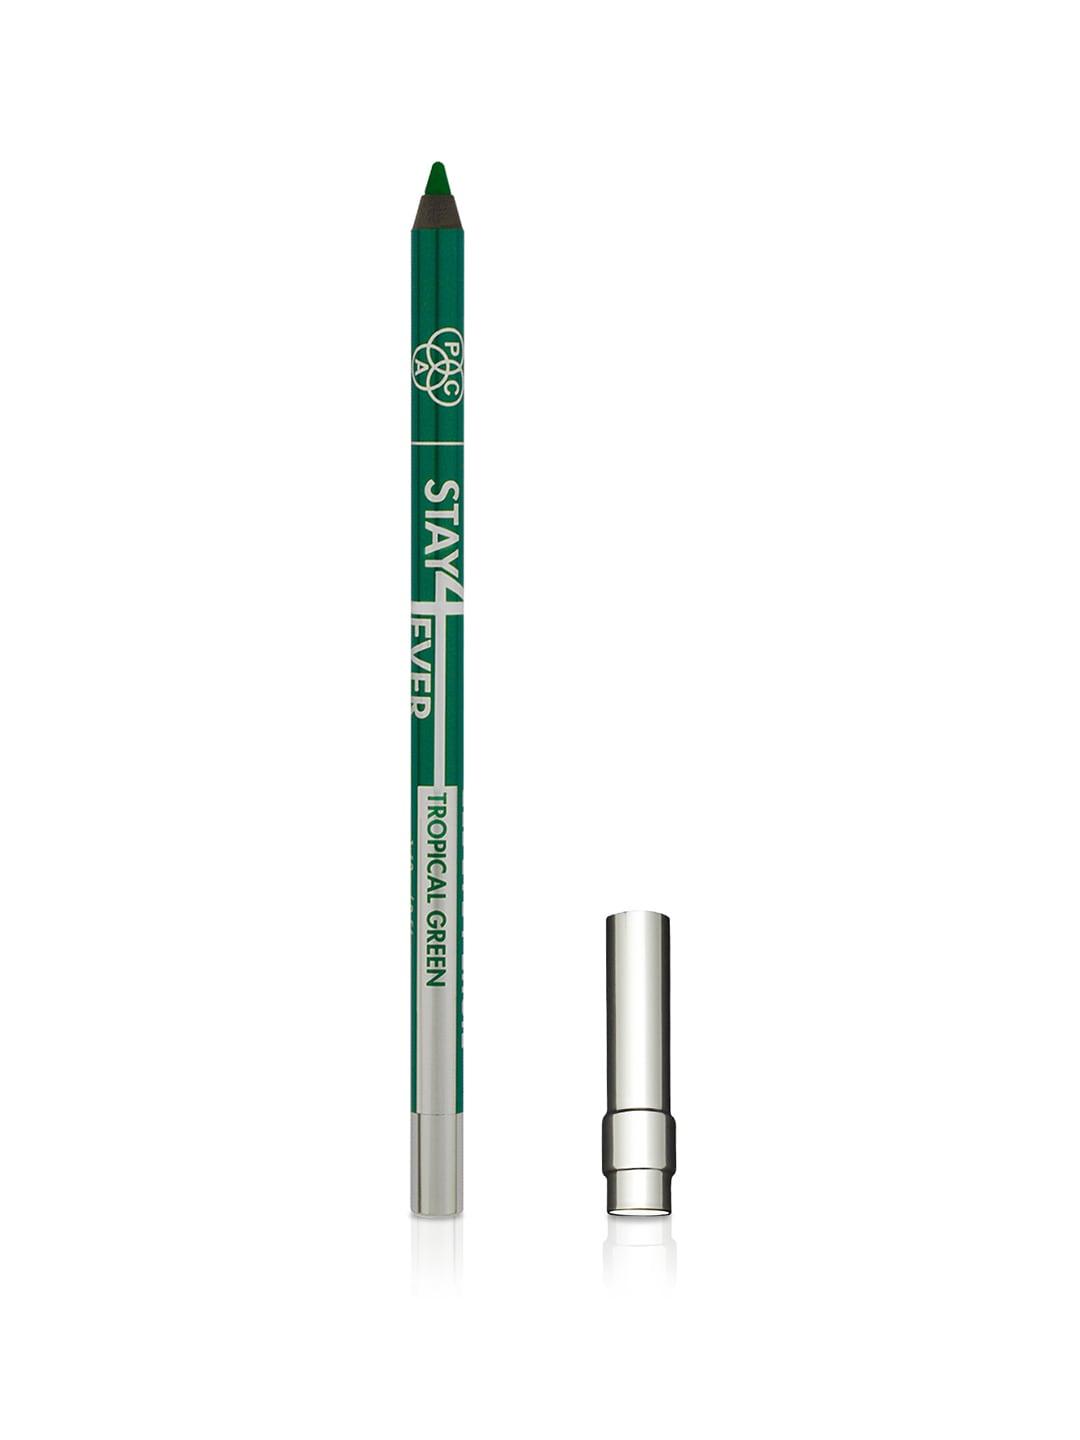 PAC Dermatologically Tested Waterproof Stay4Ever Gel Eye Pencil 1.6 g - Tropical Green